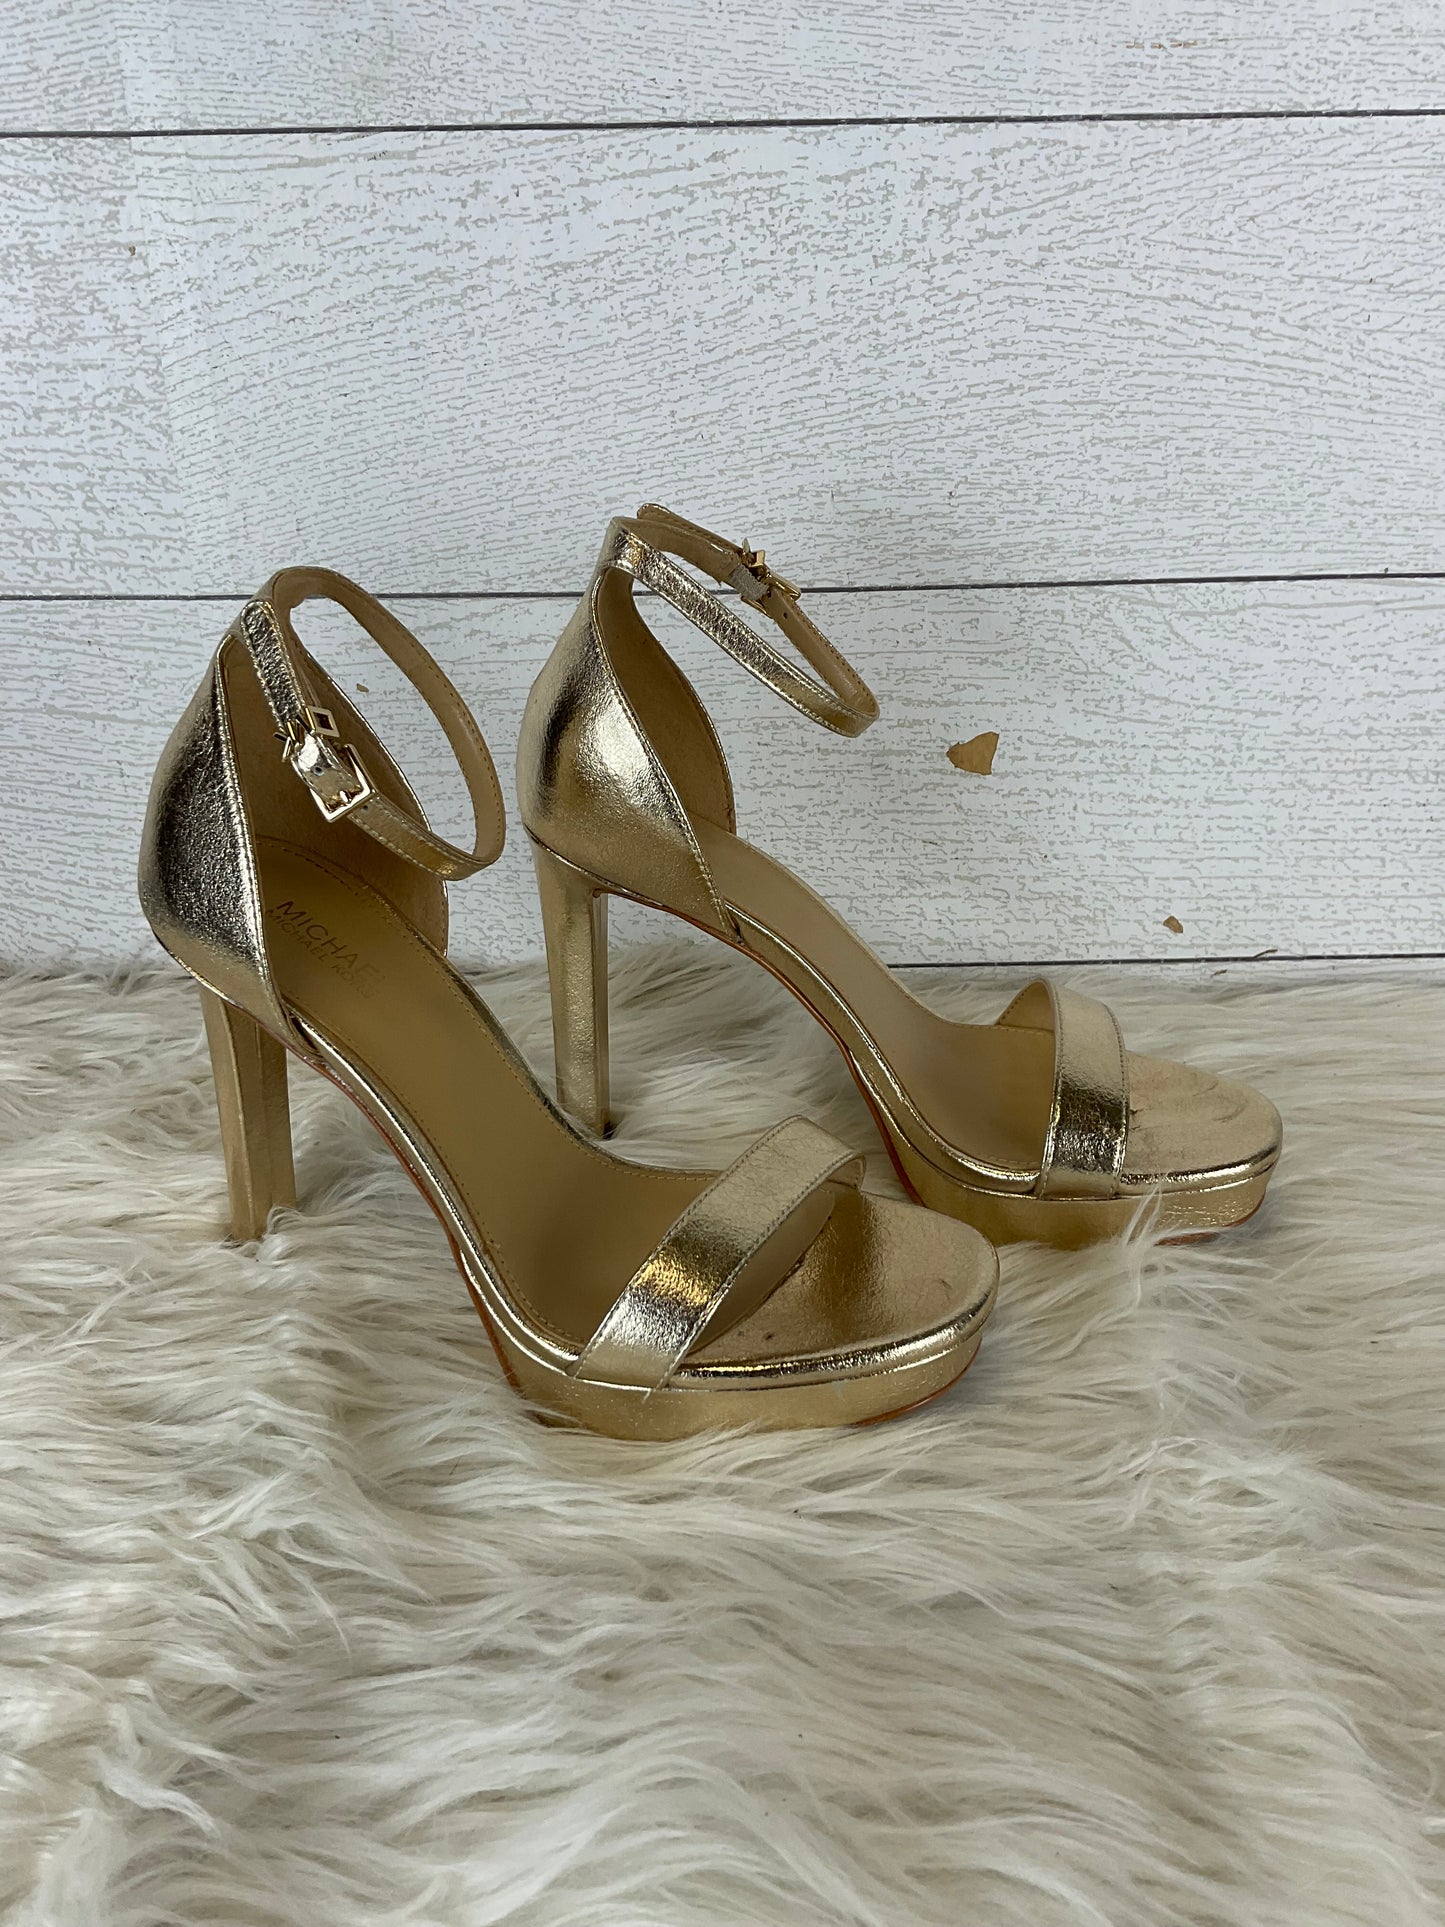 Sandals Heels Stiletto By Michael By Michael Kors  Size: 6